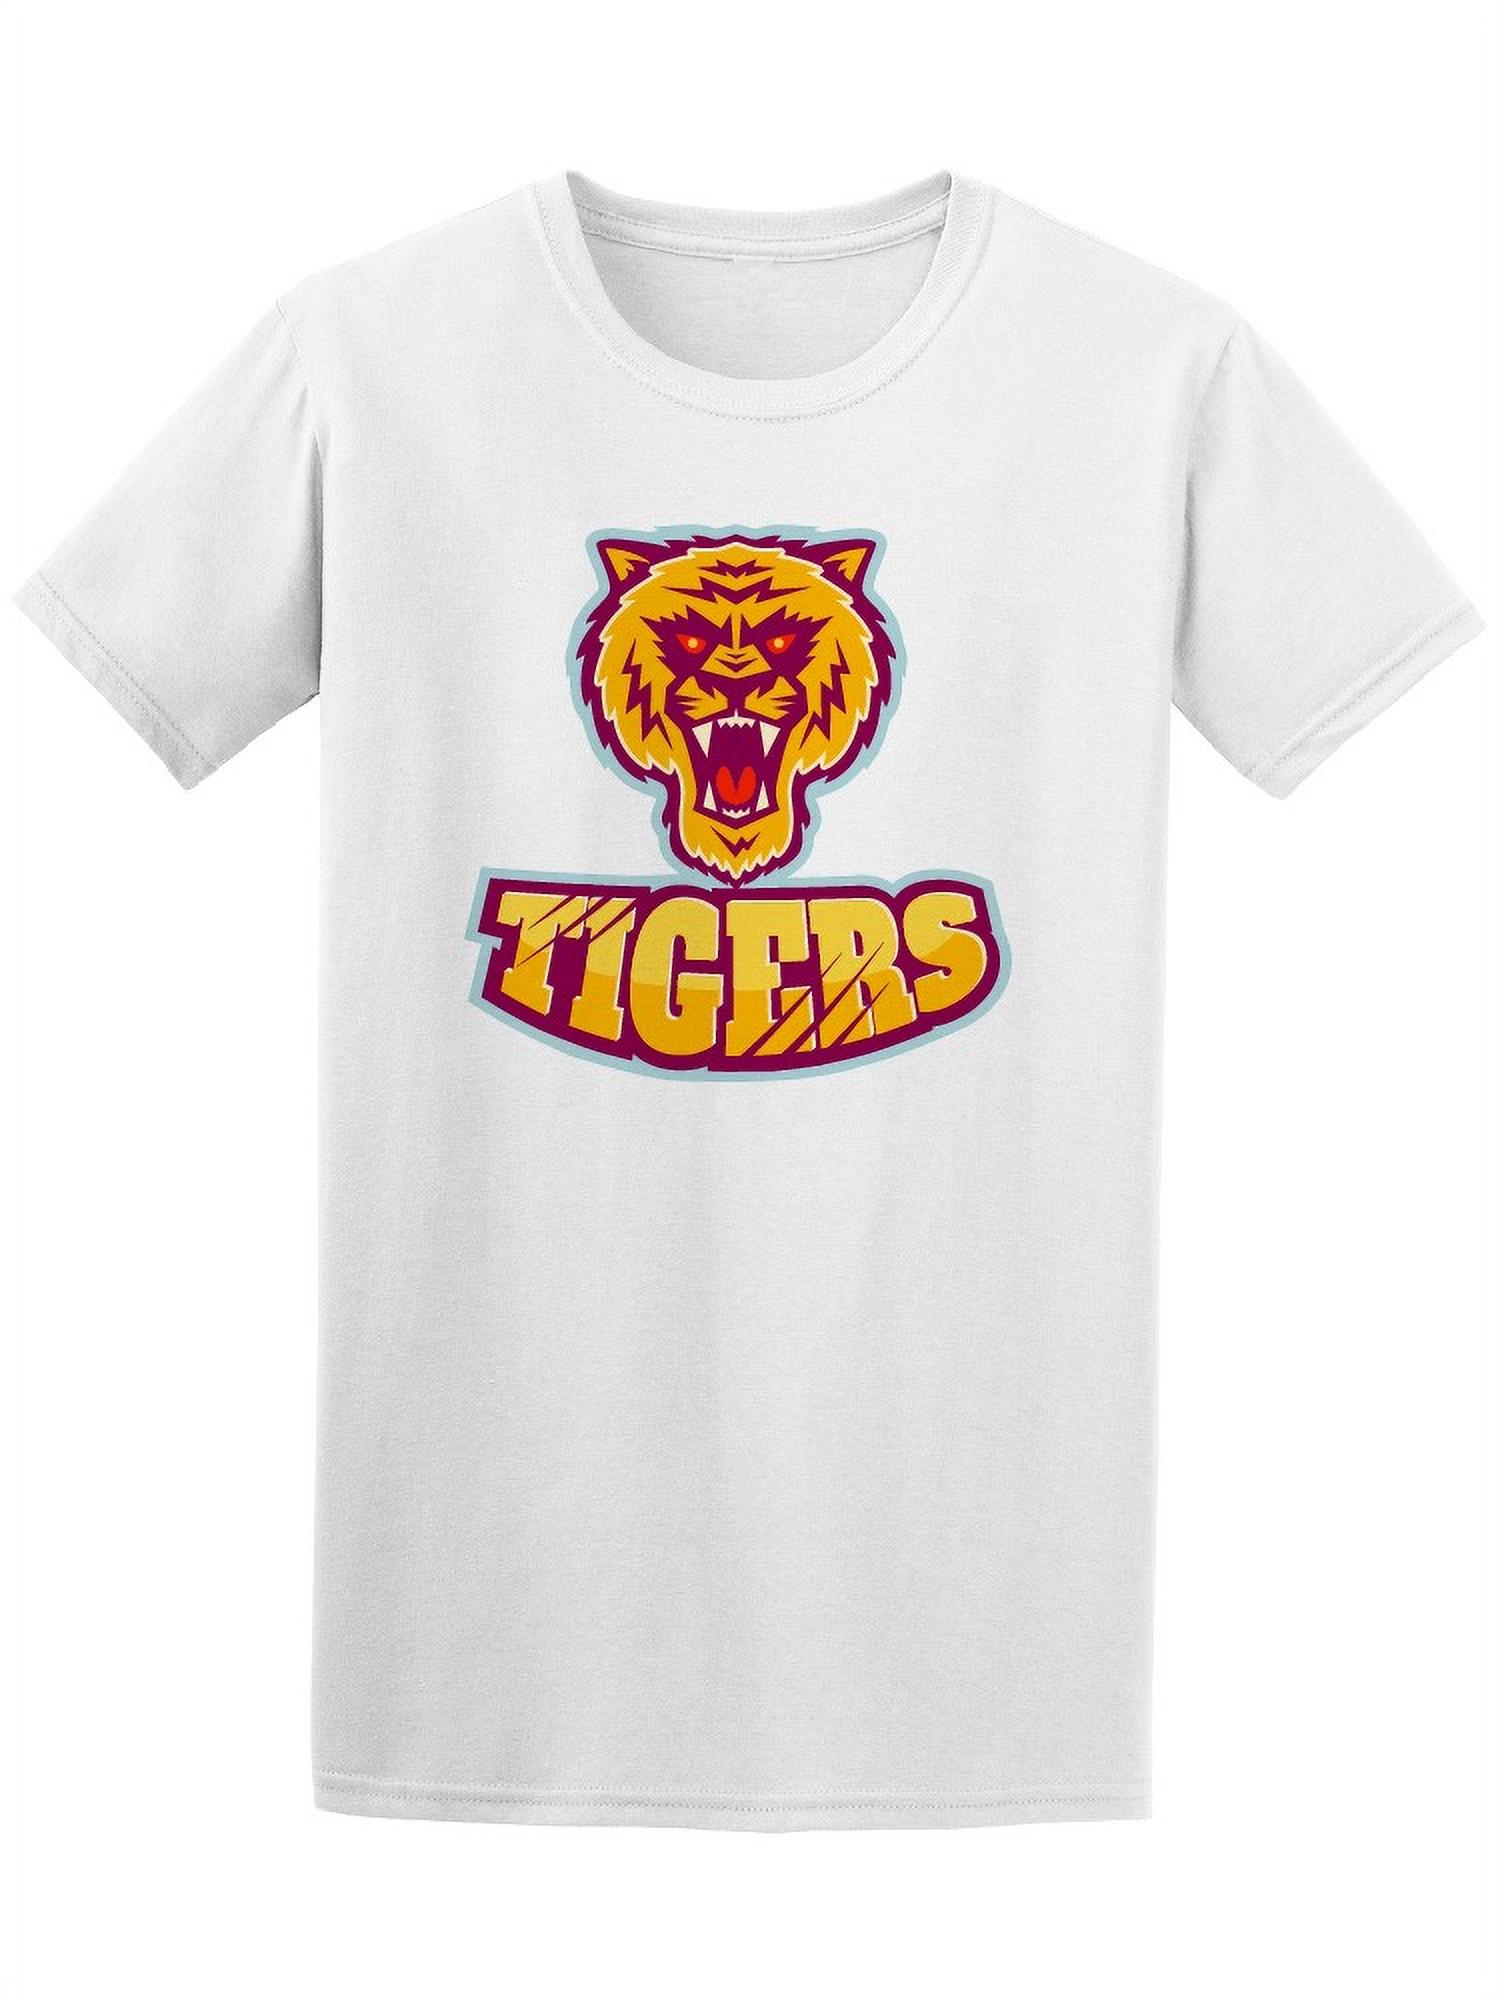 Tigers With Angry Tiger Tee Men's -Image by Shutterstock - image 1 of 2